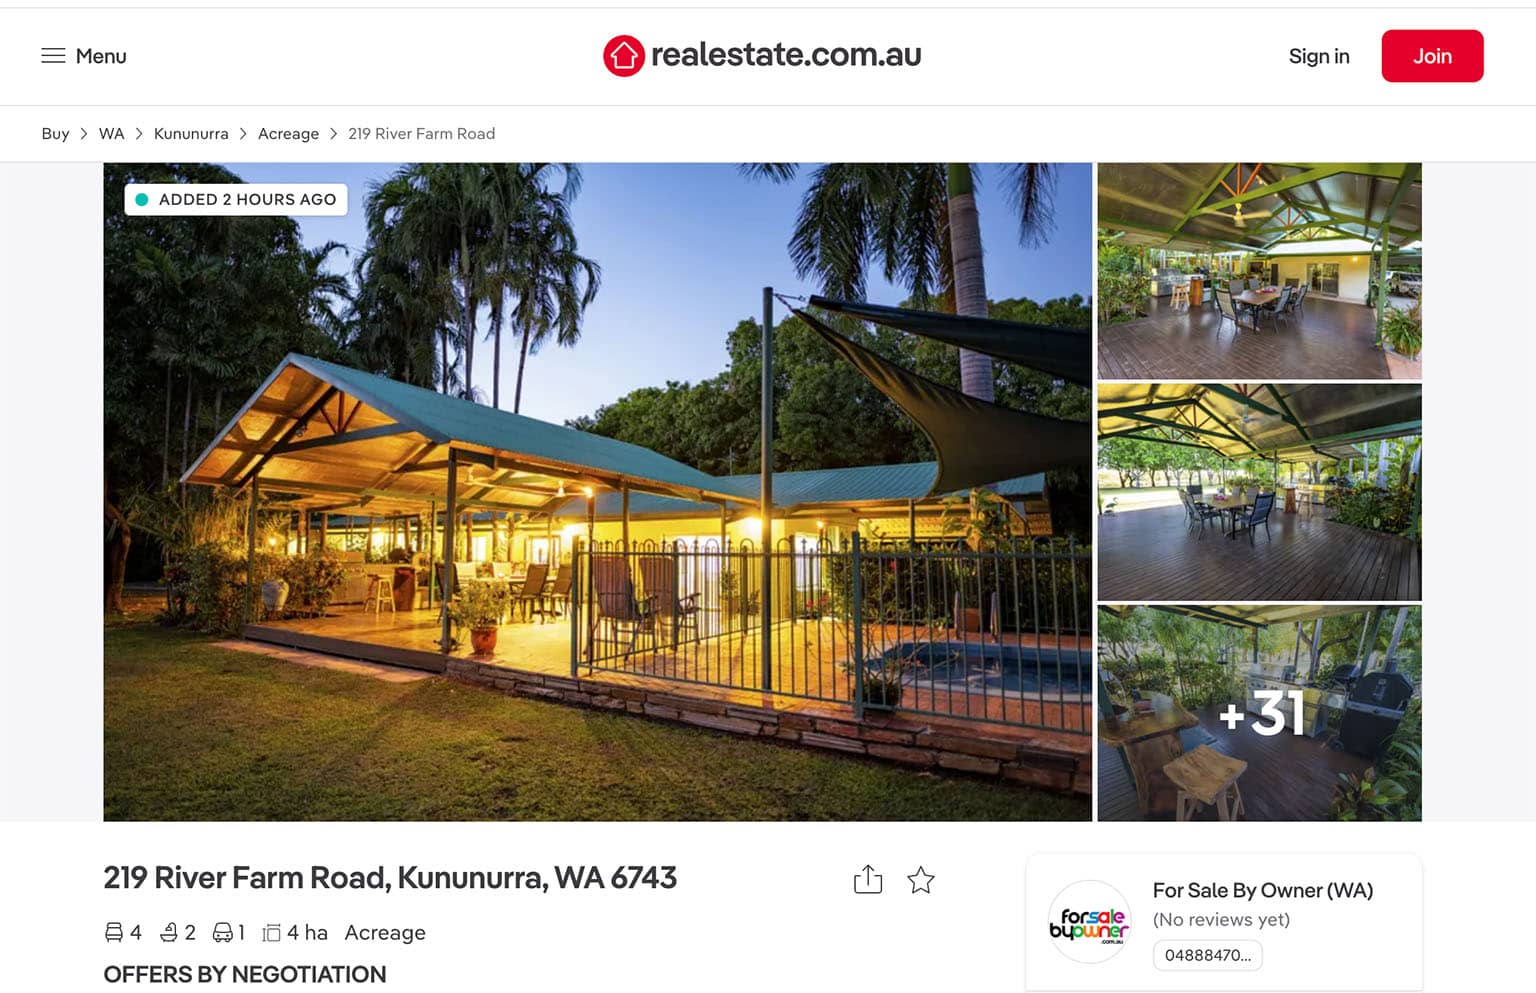 How to Advertise on Realestate.com.au Privately